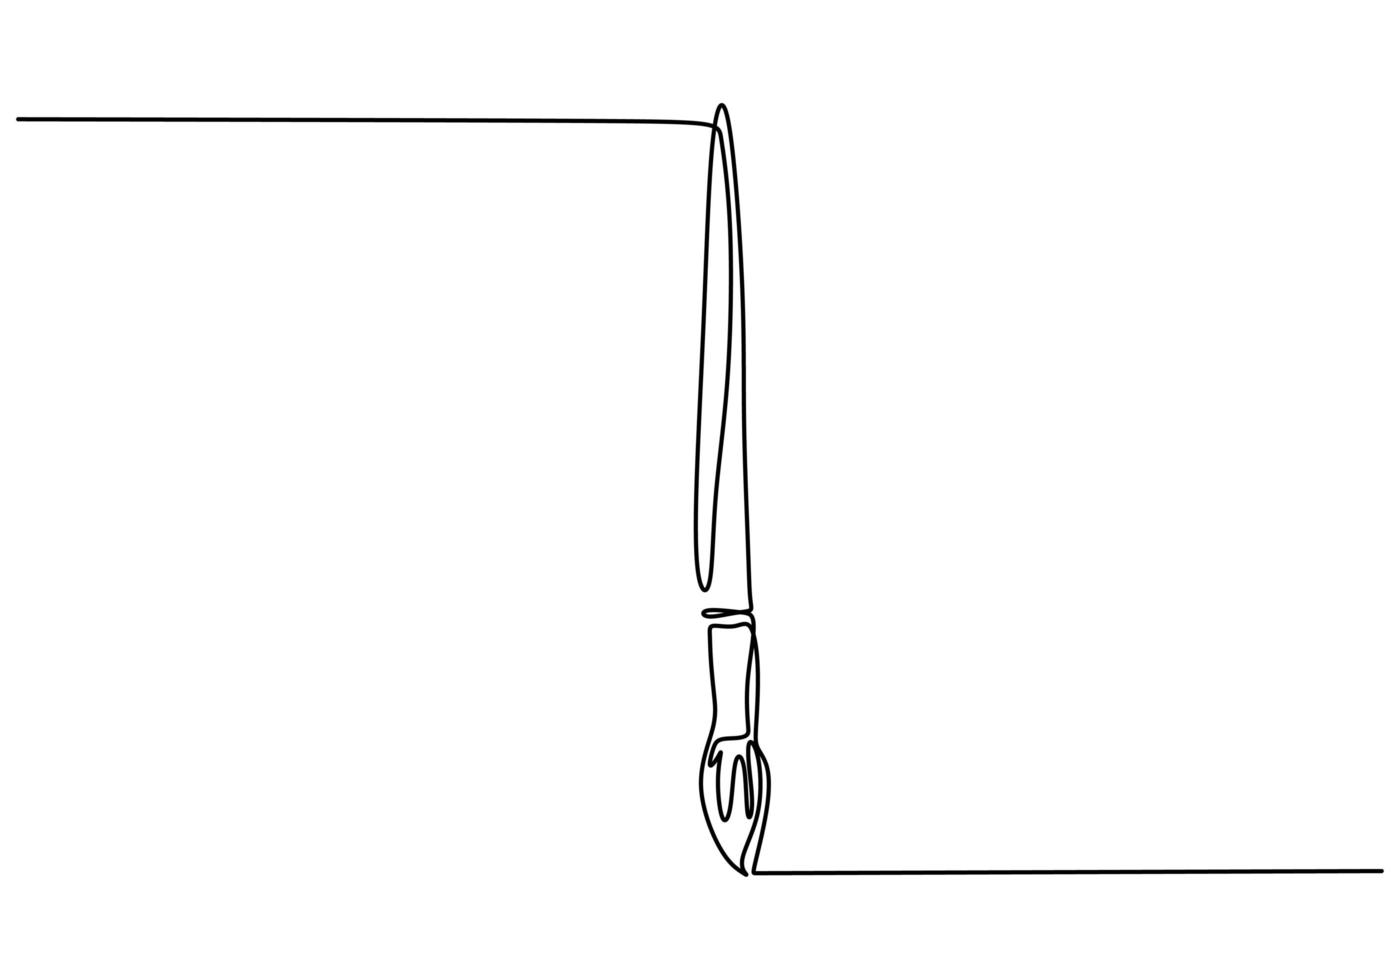 Paint brush one line drawing, vector illustration simplicity hand drawn. Tool for artist or painter.